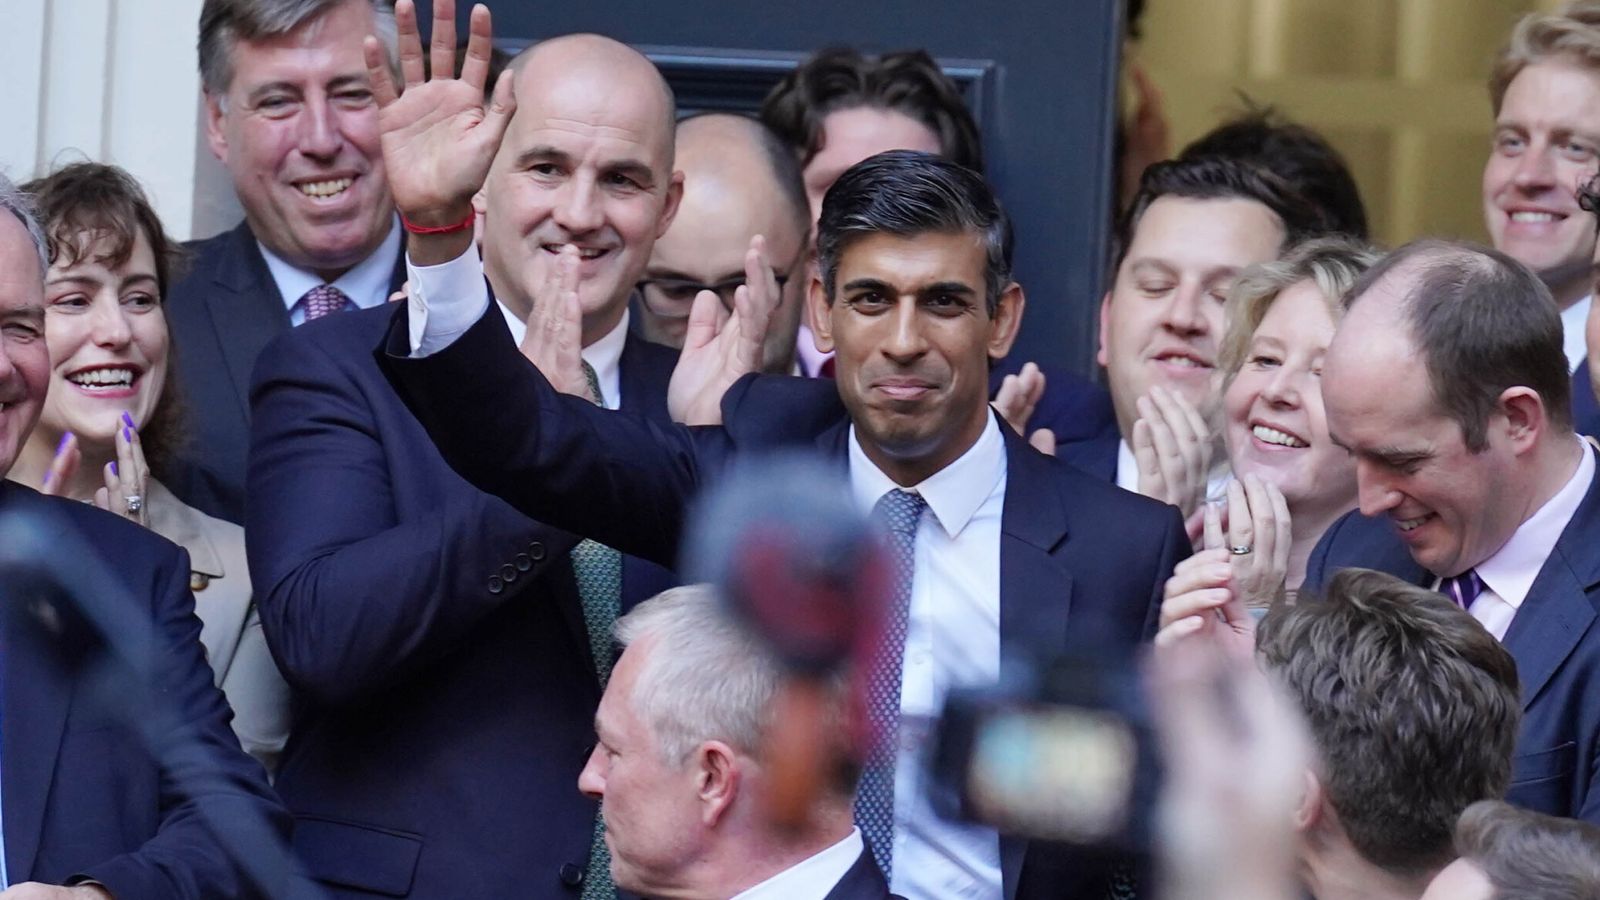 Rishi Sunak warns UK faces 'profound economic challenge' as he wins race to become PM